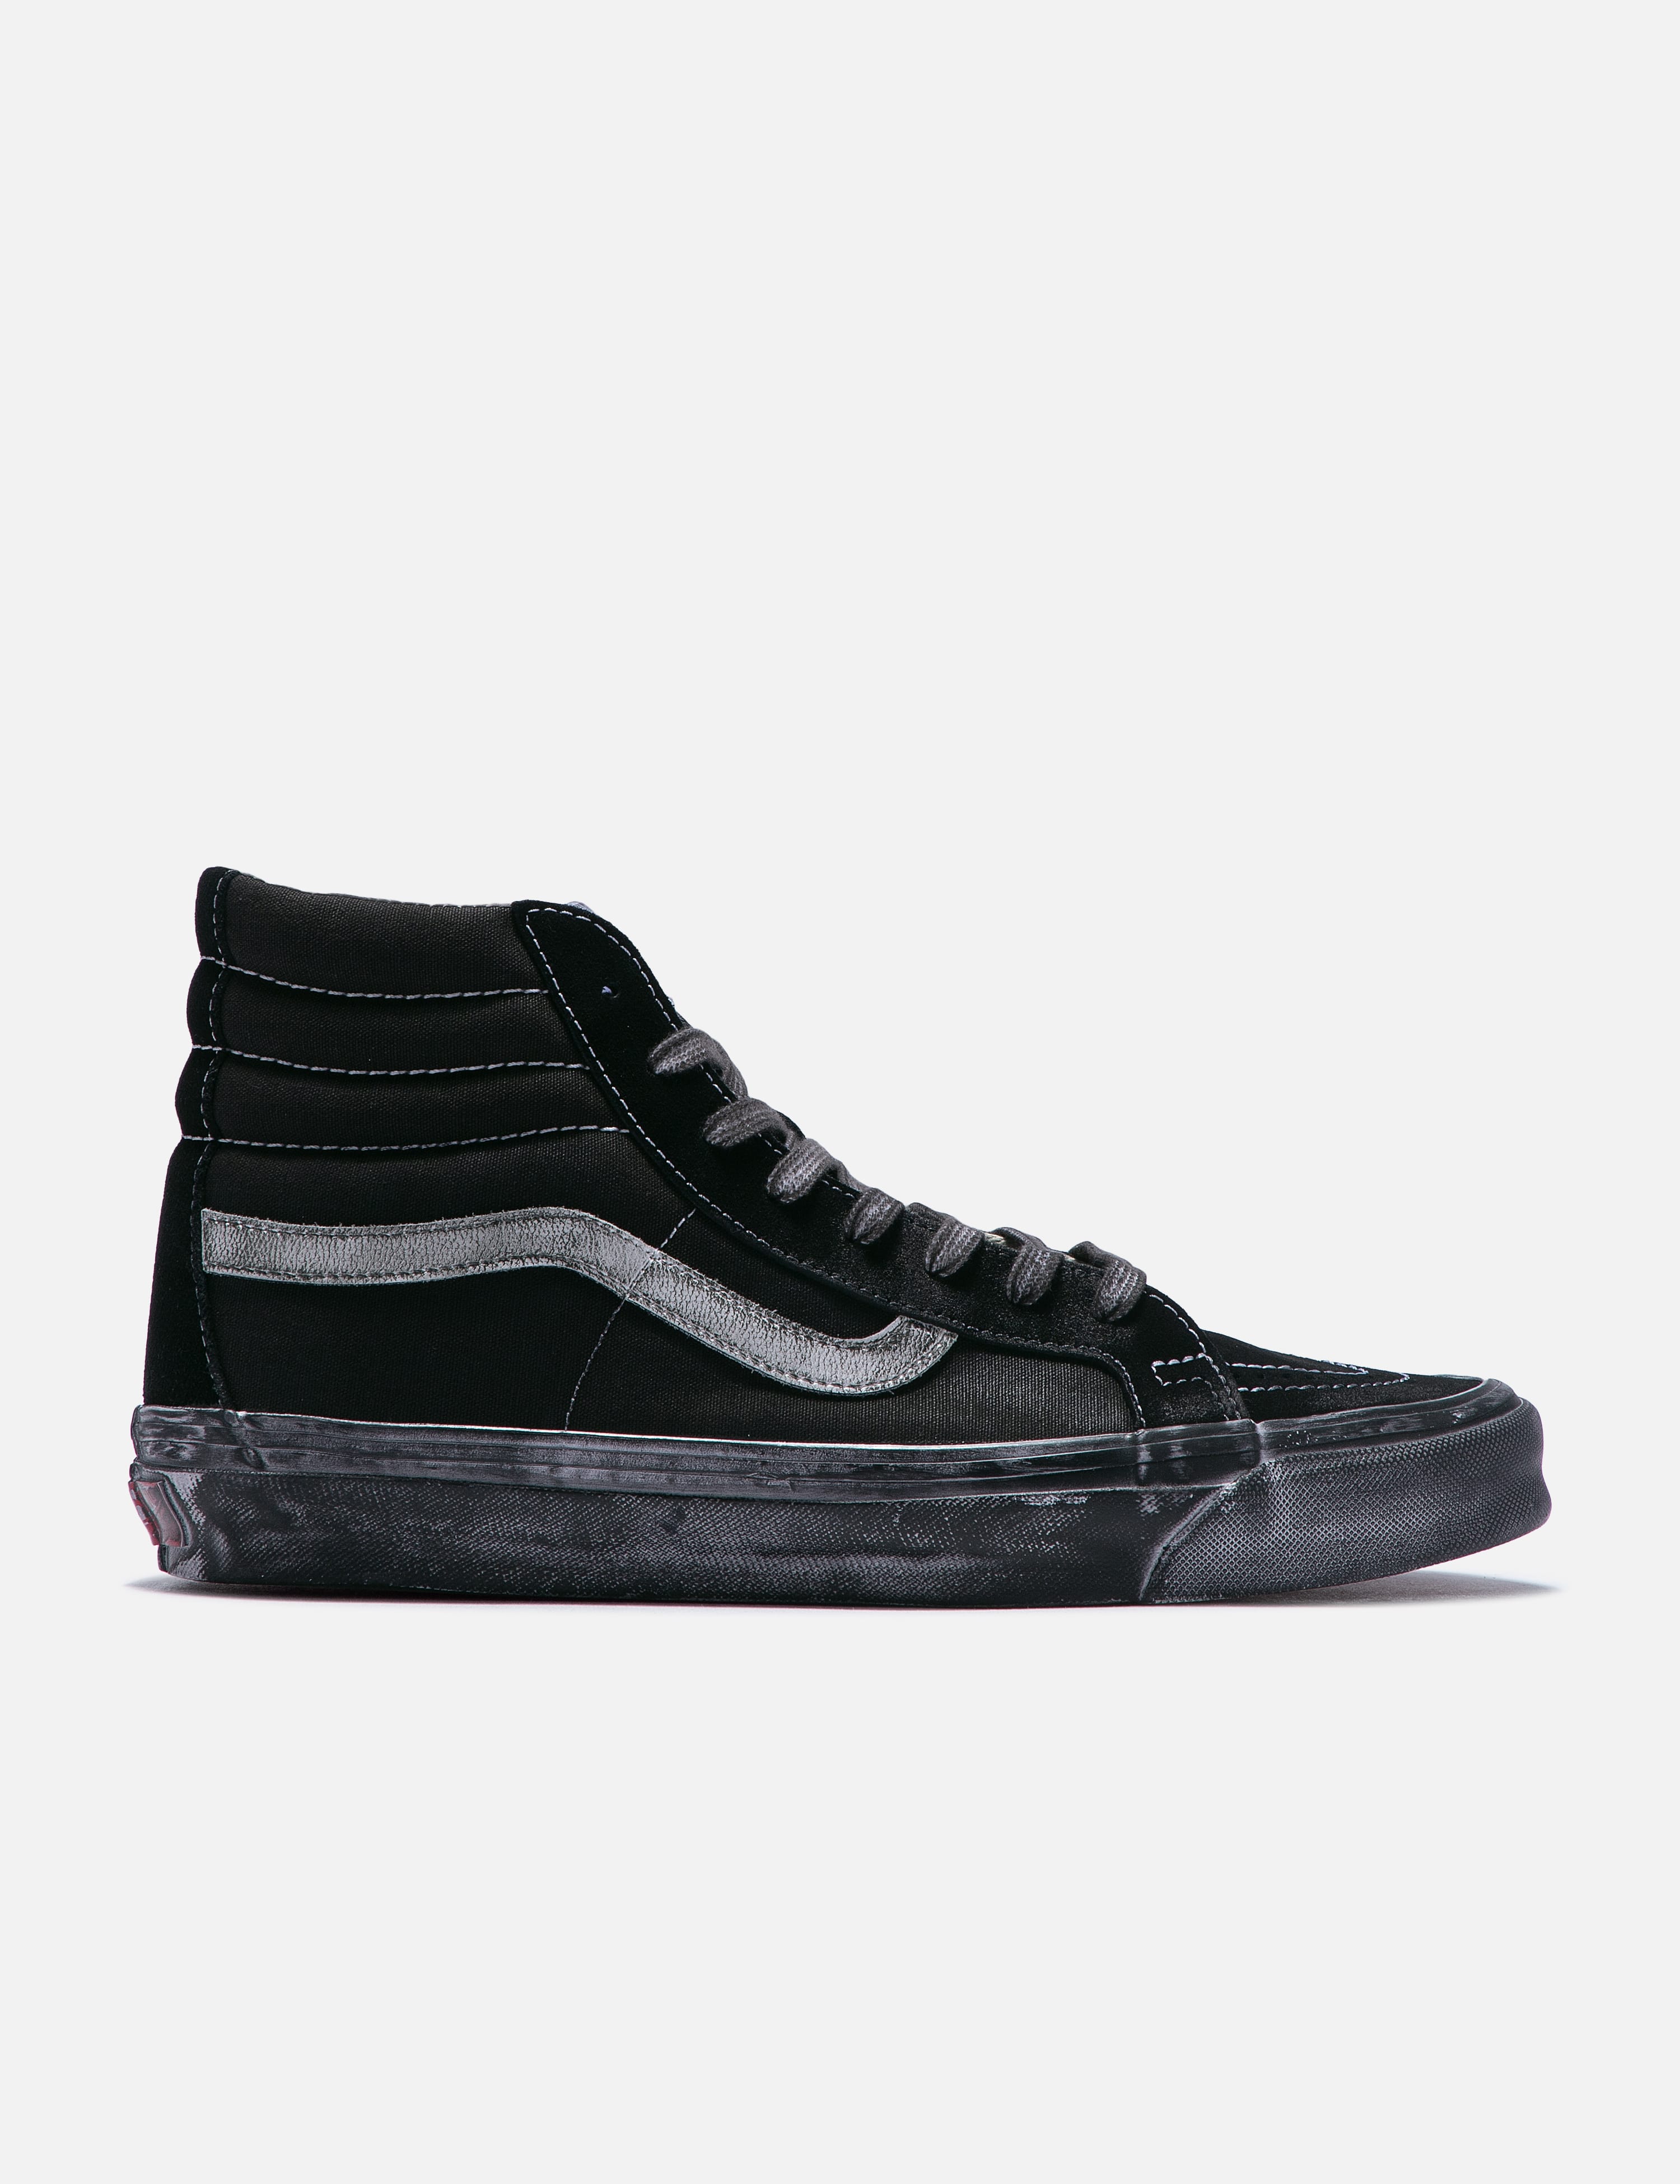 Vans - Sk8-HI LX OG | HBX - Globally Curated Fashion and Lifestyle